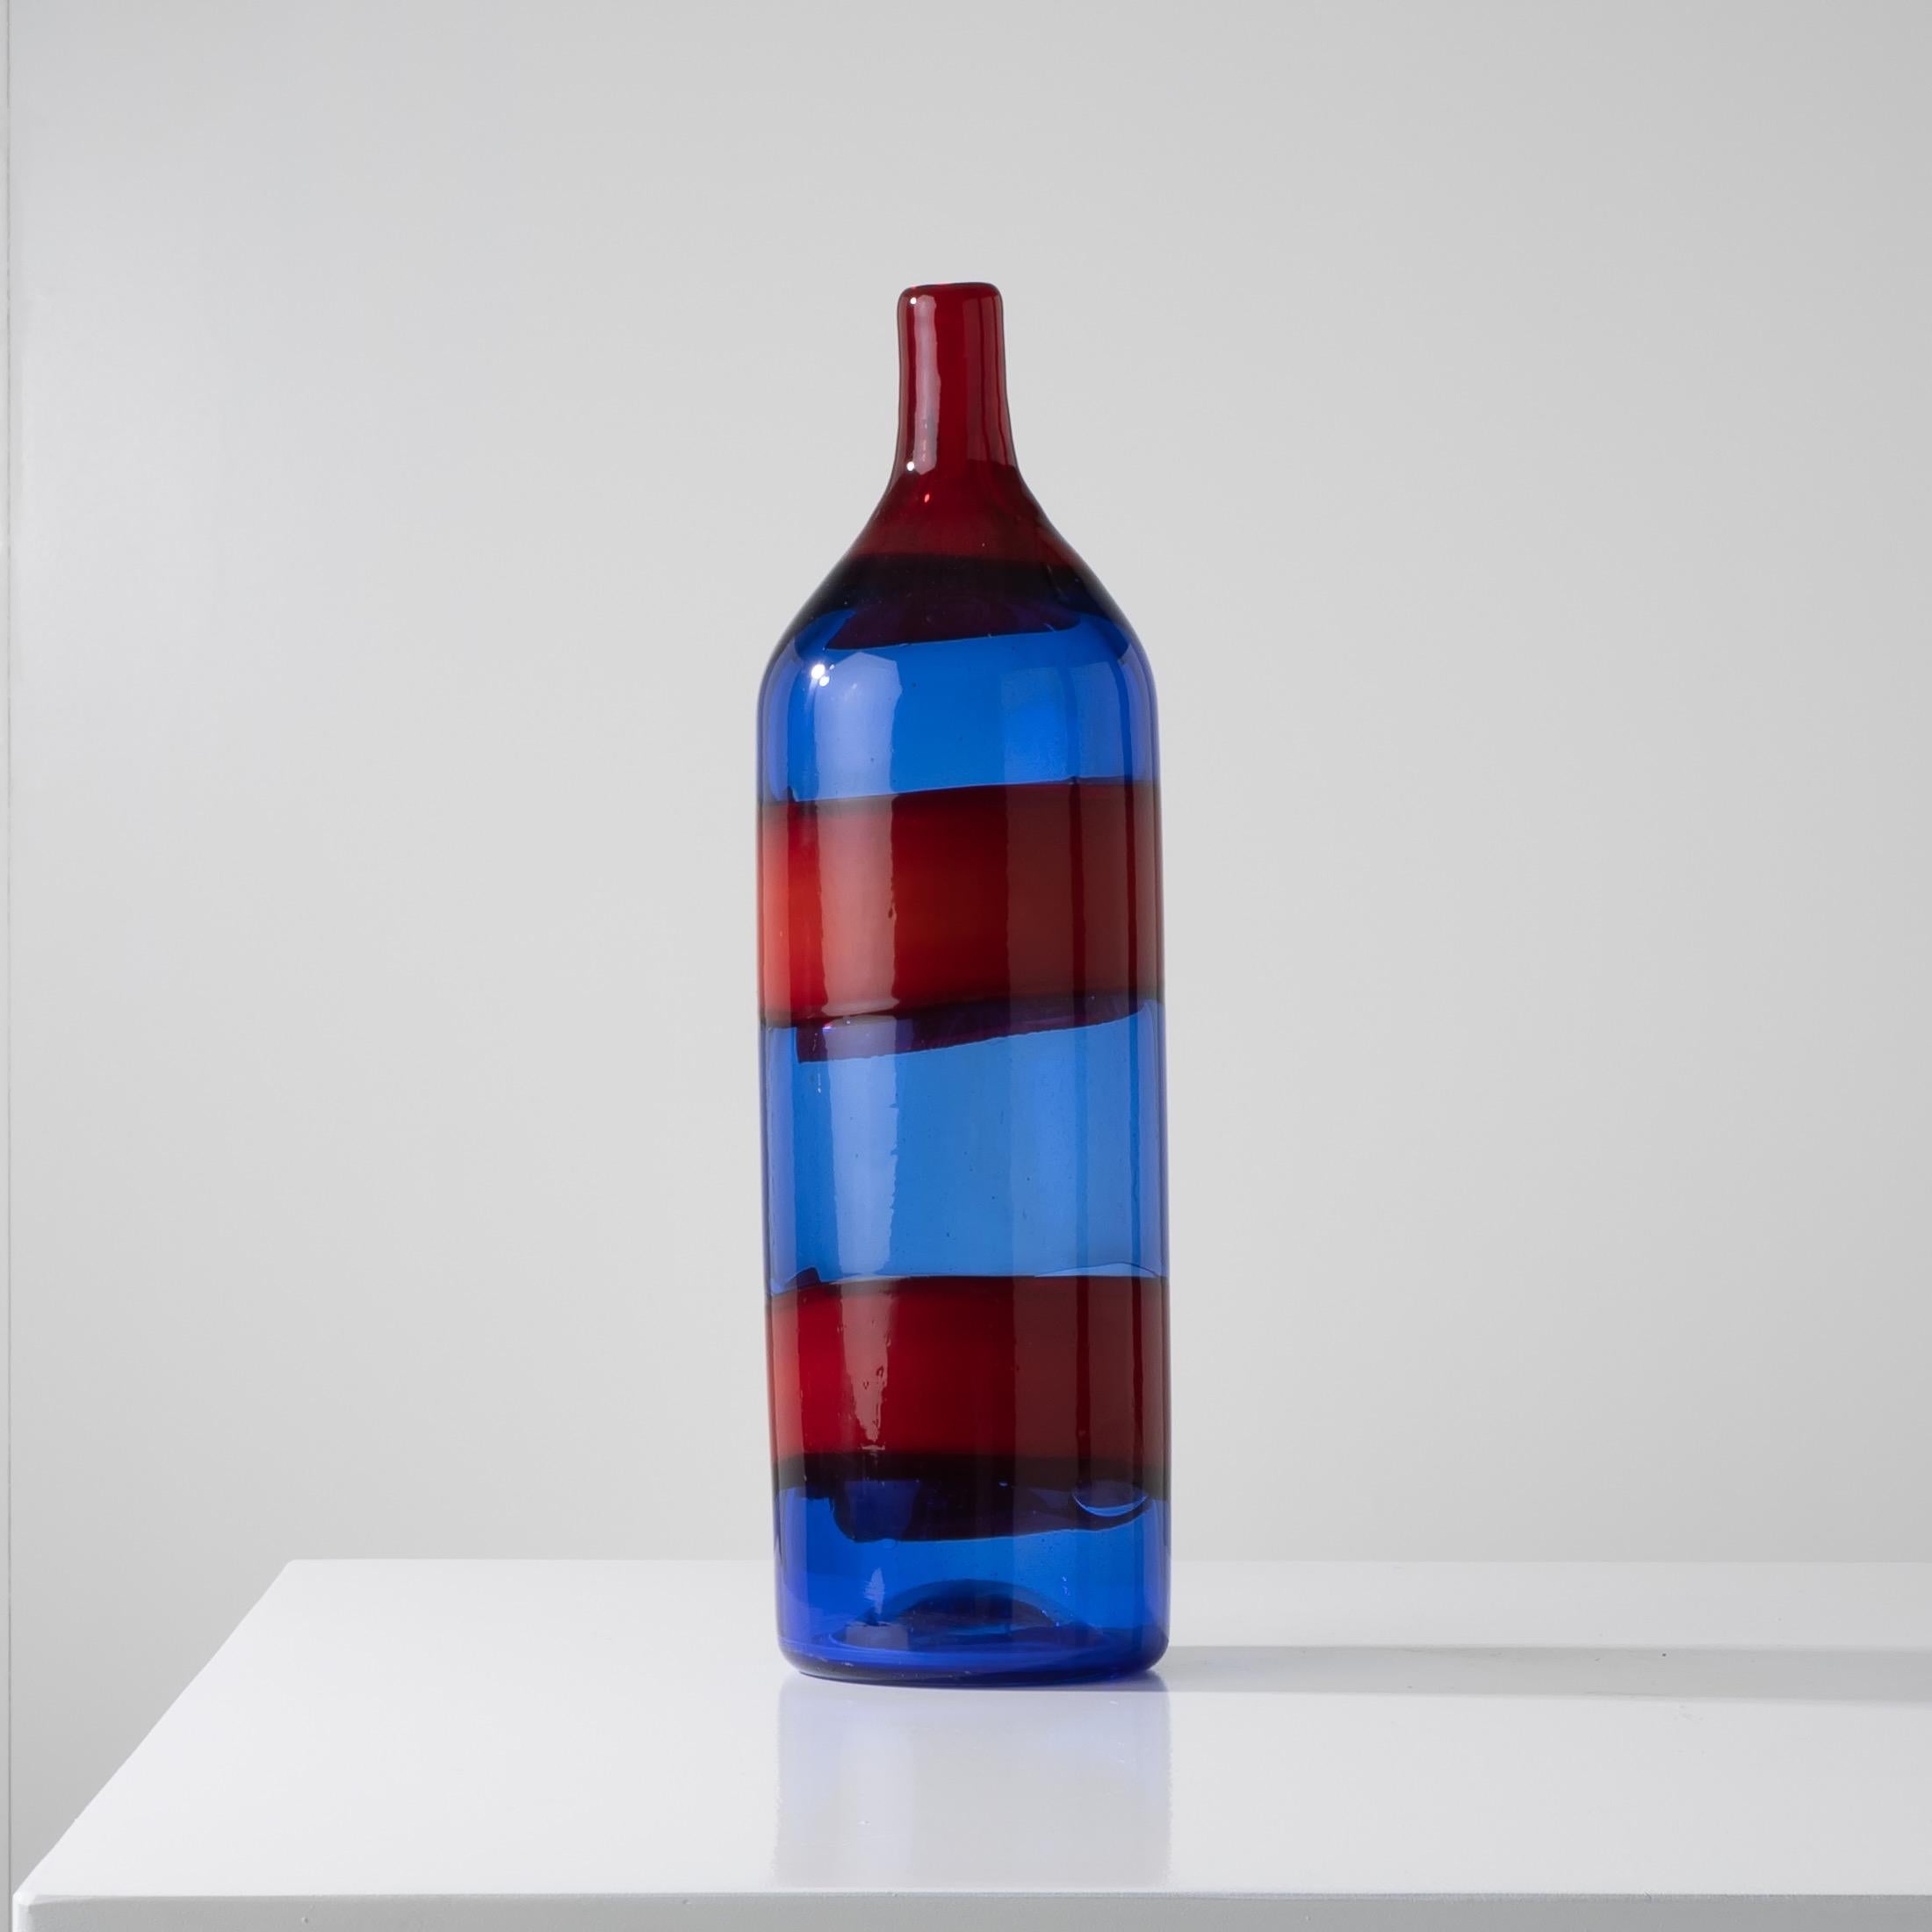 Large blue blown glass bottle vase decorated with two hot applied red bands.
The neck consists of a layer of translucent red glass which is itself different from the glass used for the bands on the body of the vase which have a white